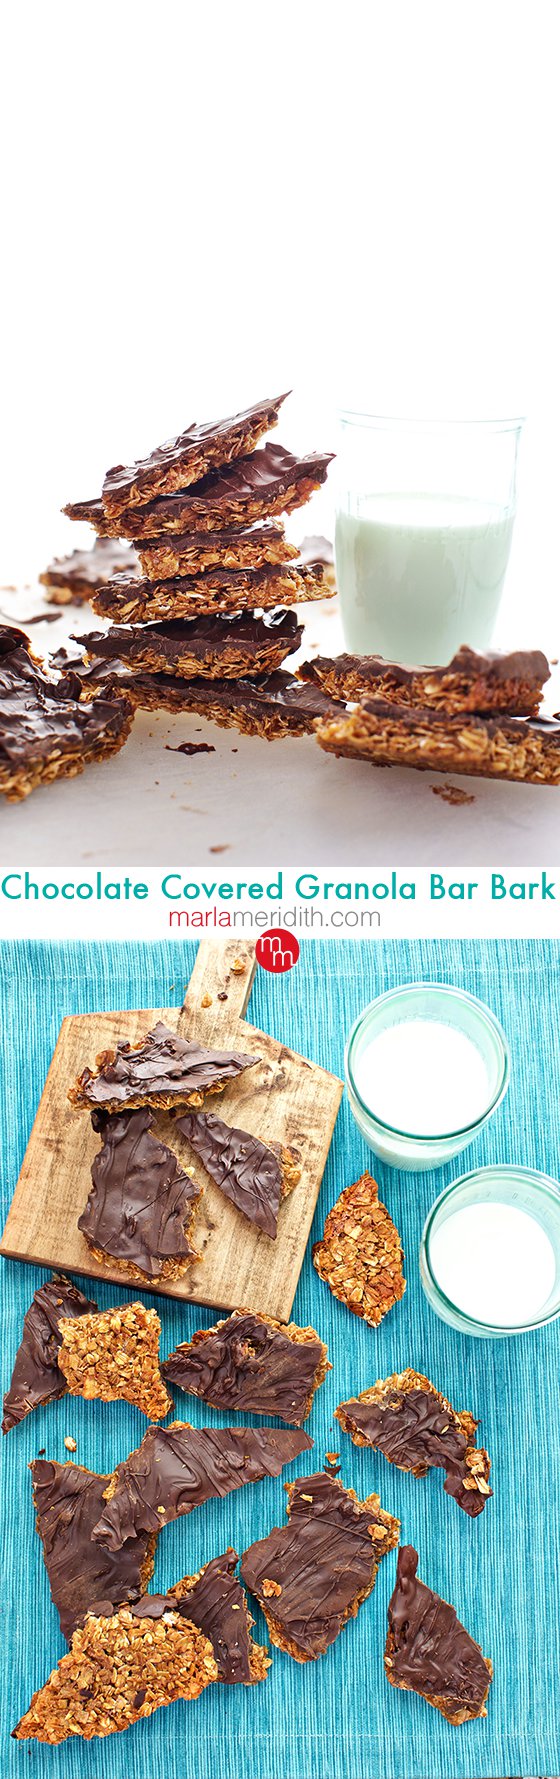 Chocolate Covered Granola Bar Bark, a gluten free recipe great in lunch boxes & perfect for homemade holiday gifts too! MarlaMeridith.com ( @marlameridith )